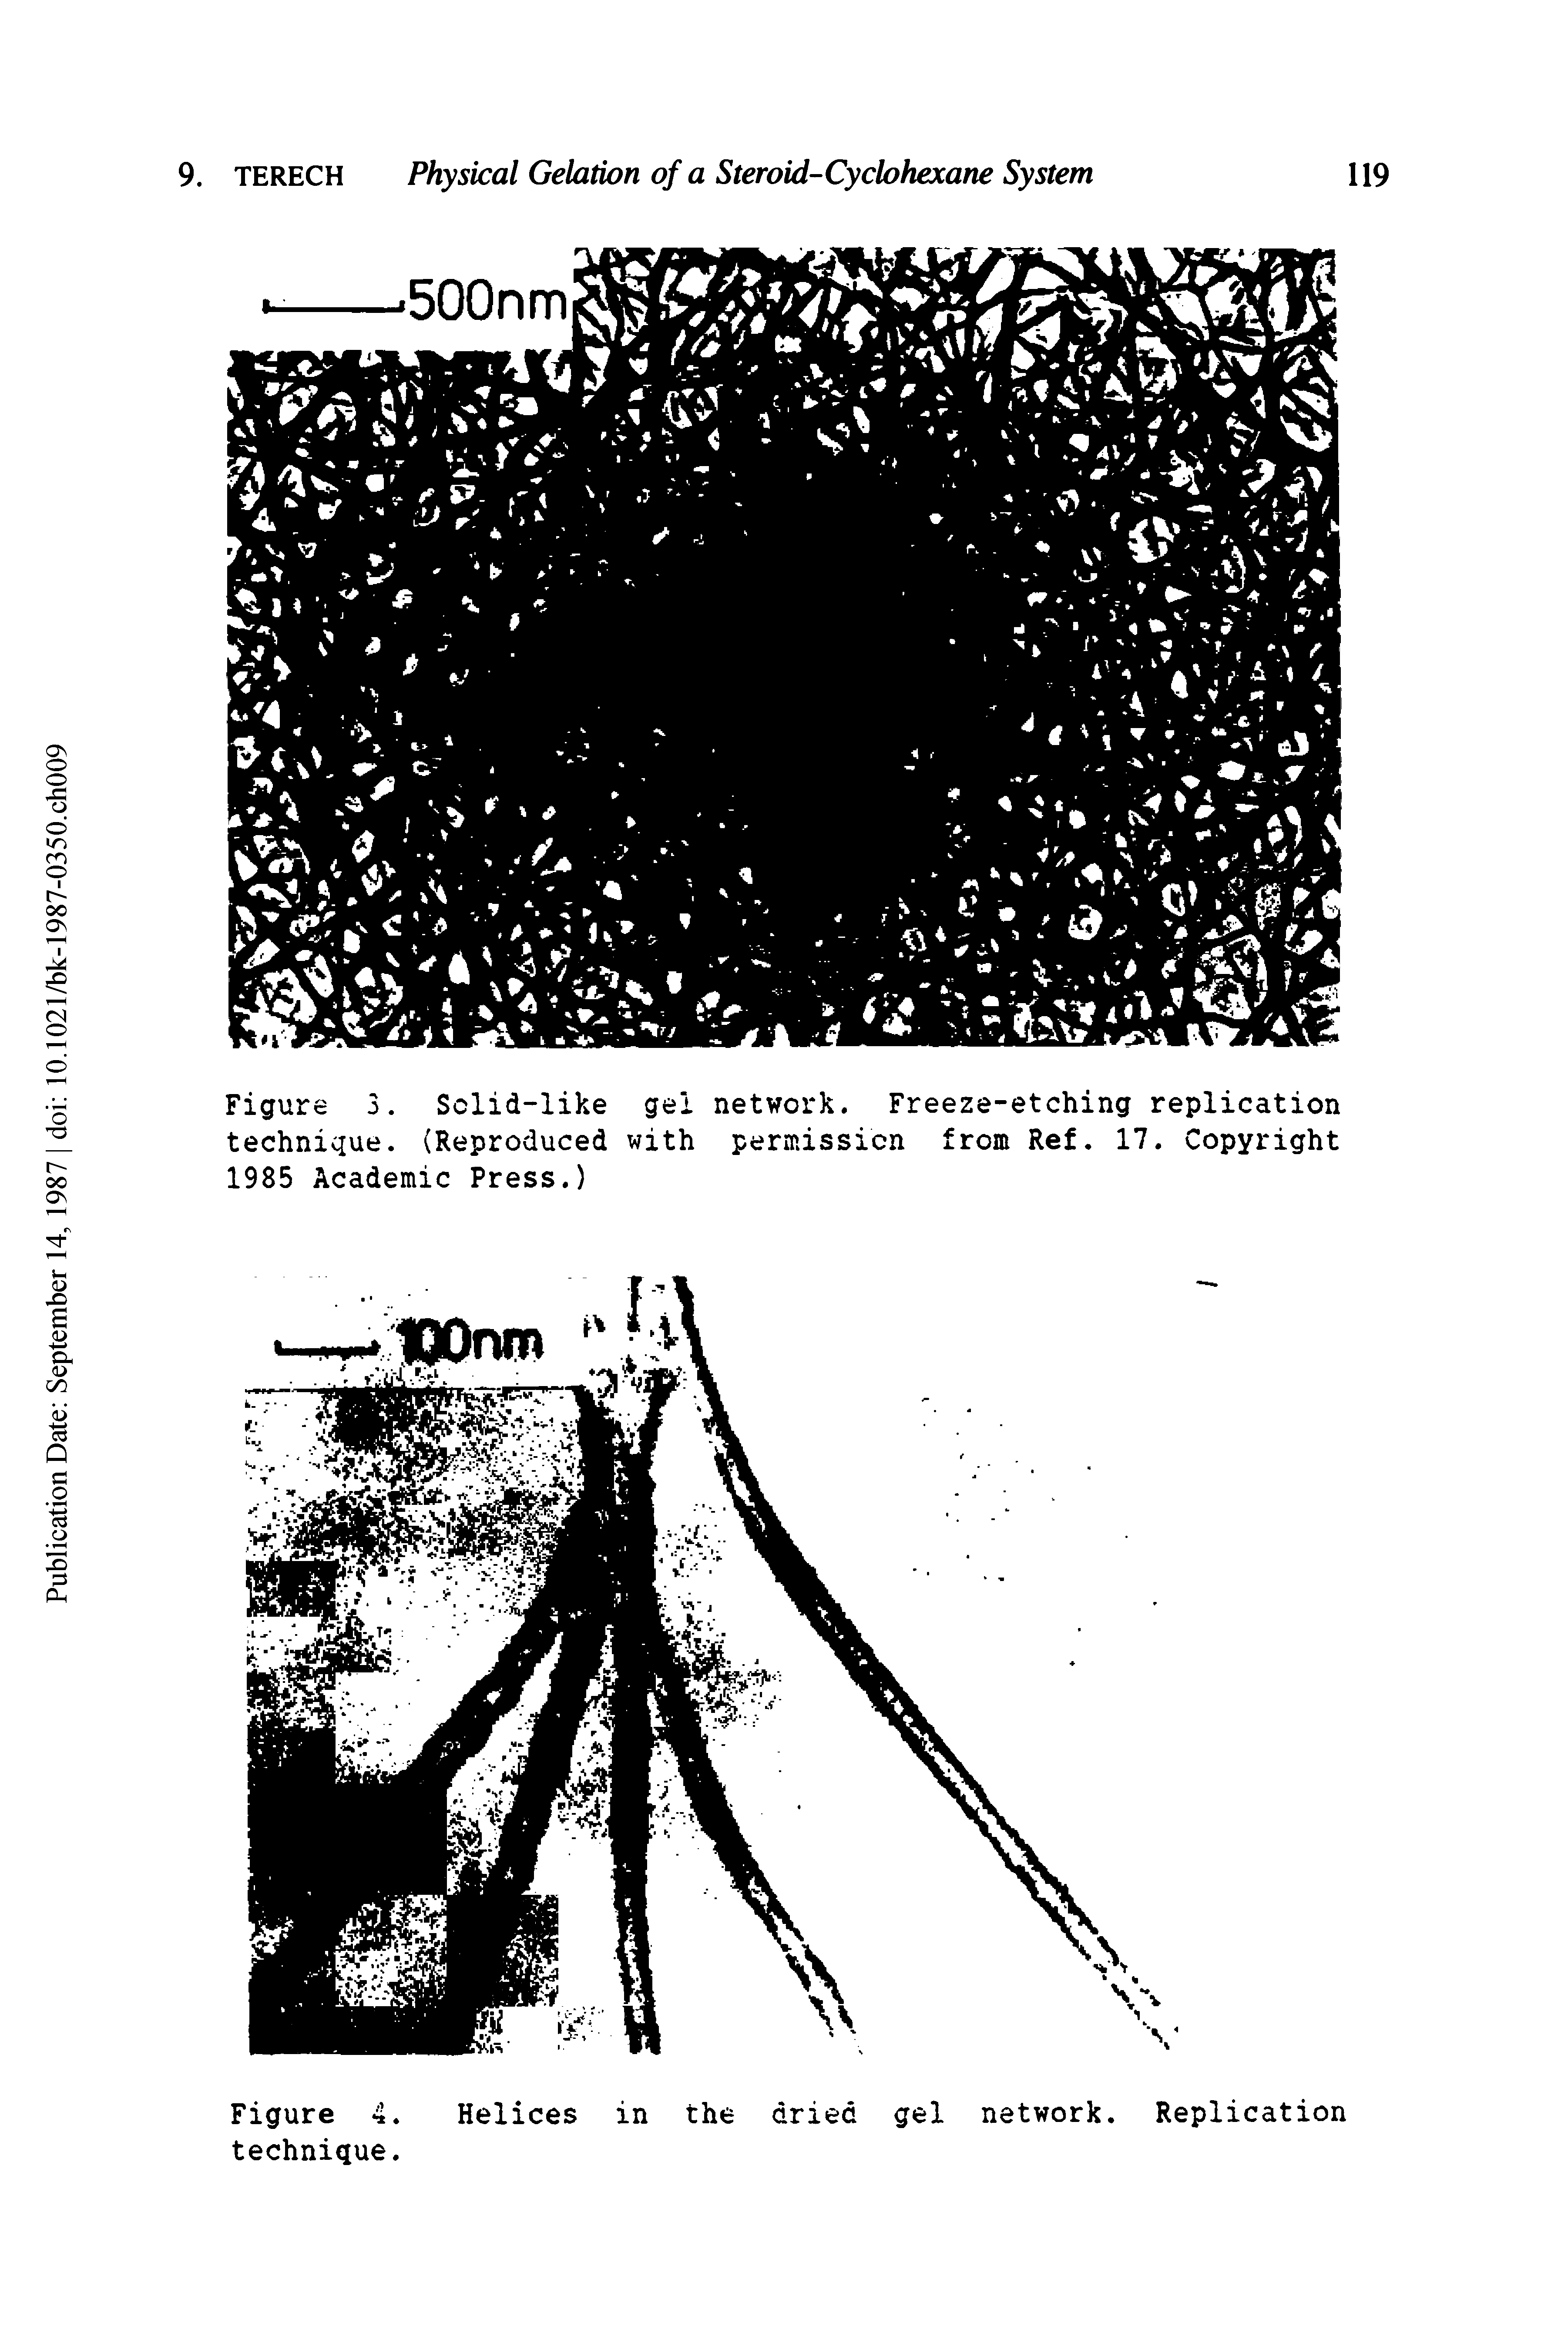 Figure 3. Sclid-like gel network. Freeze-etching replication technique. (Reproduced with permission from Ref. 17. Copyright 1985 Academic Press.)...